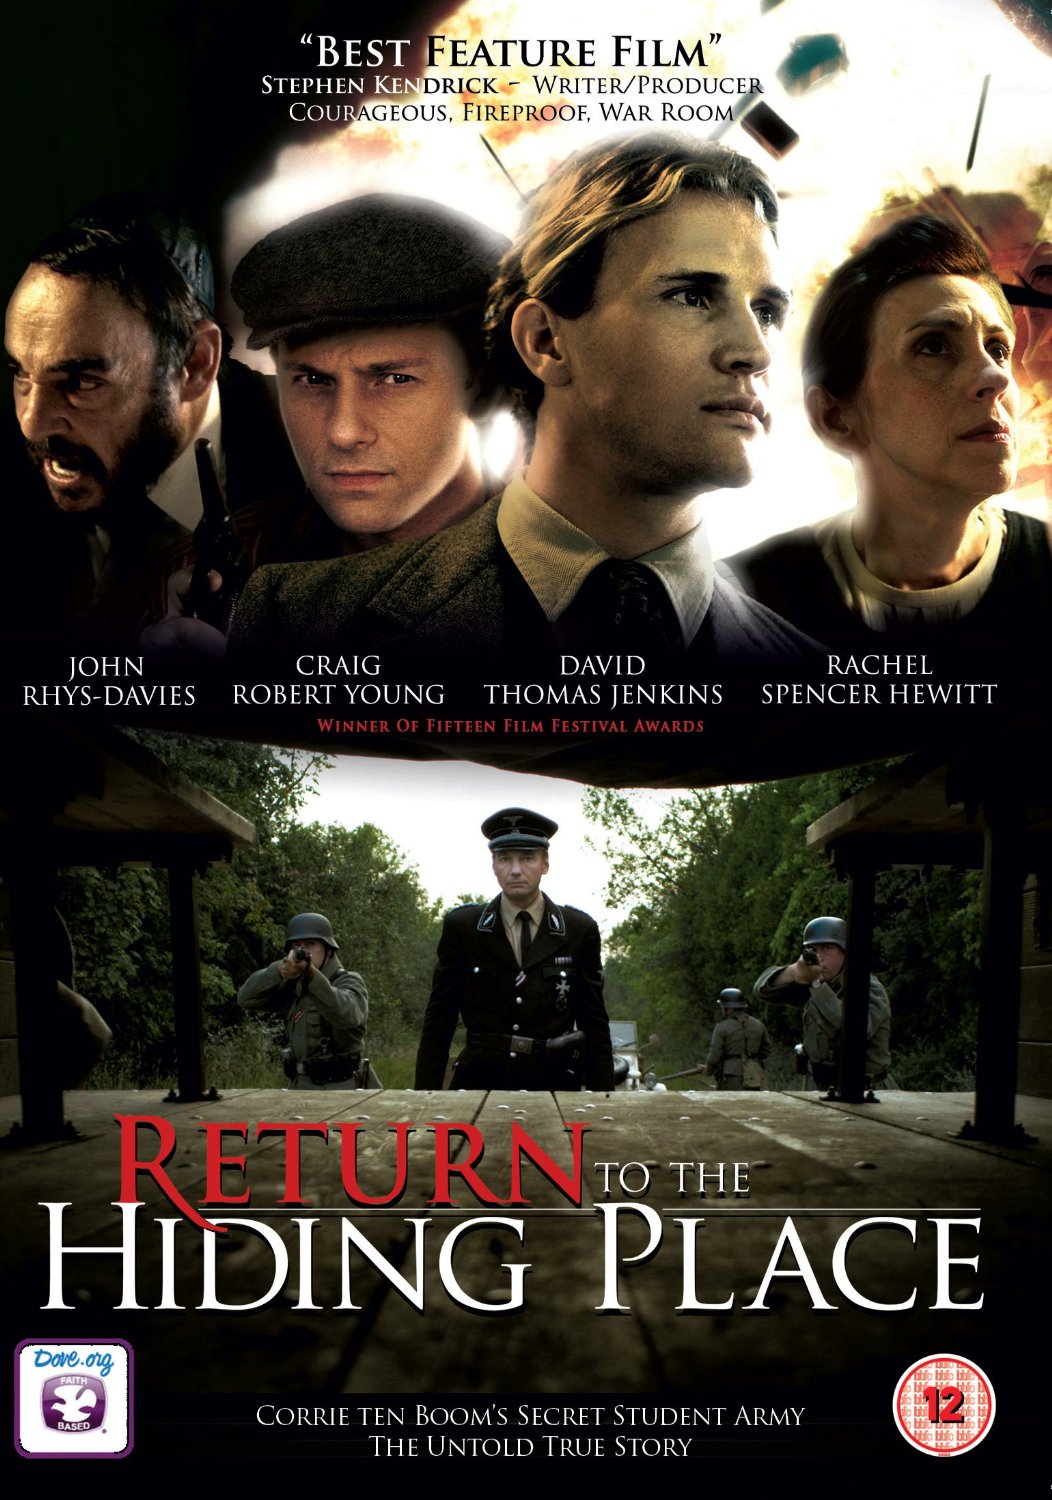 Image of Return to the Hiding Place DVD other